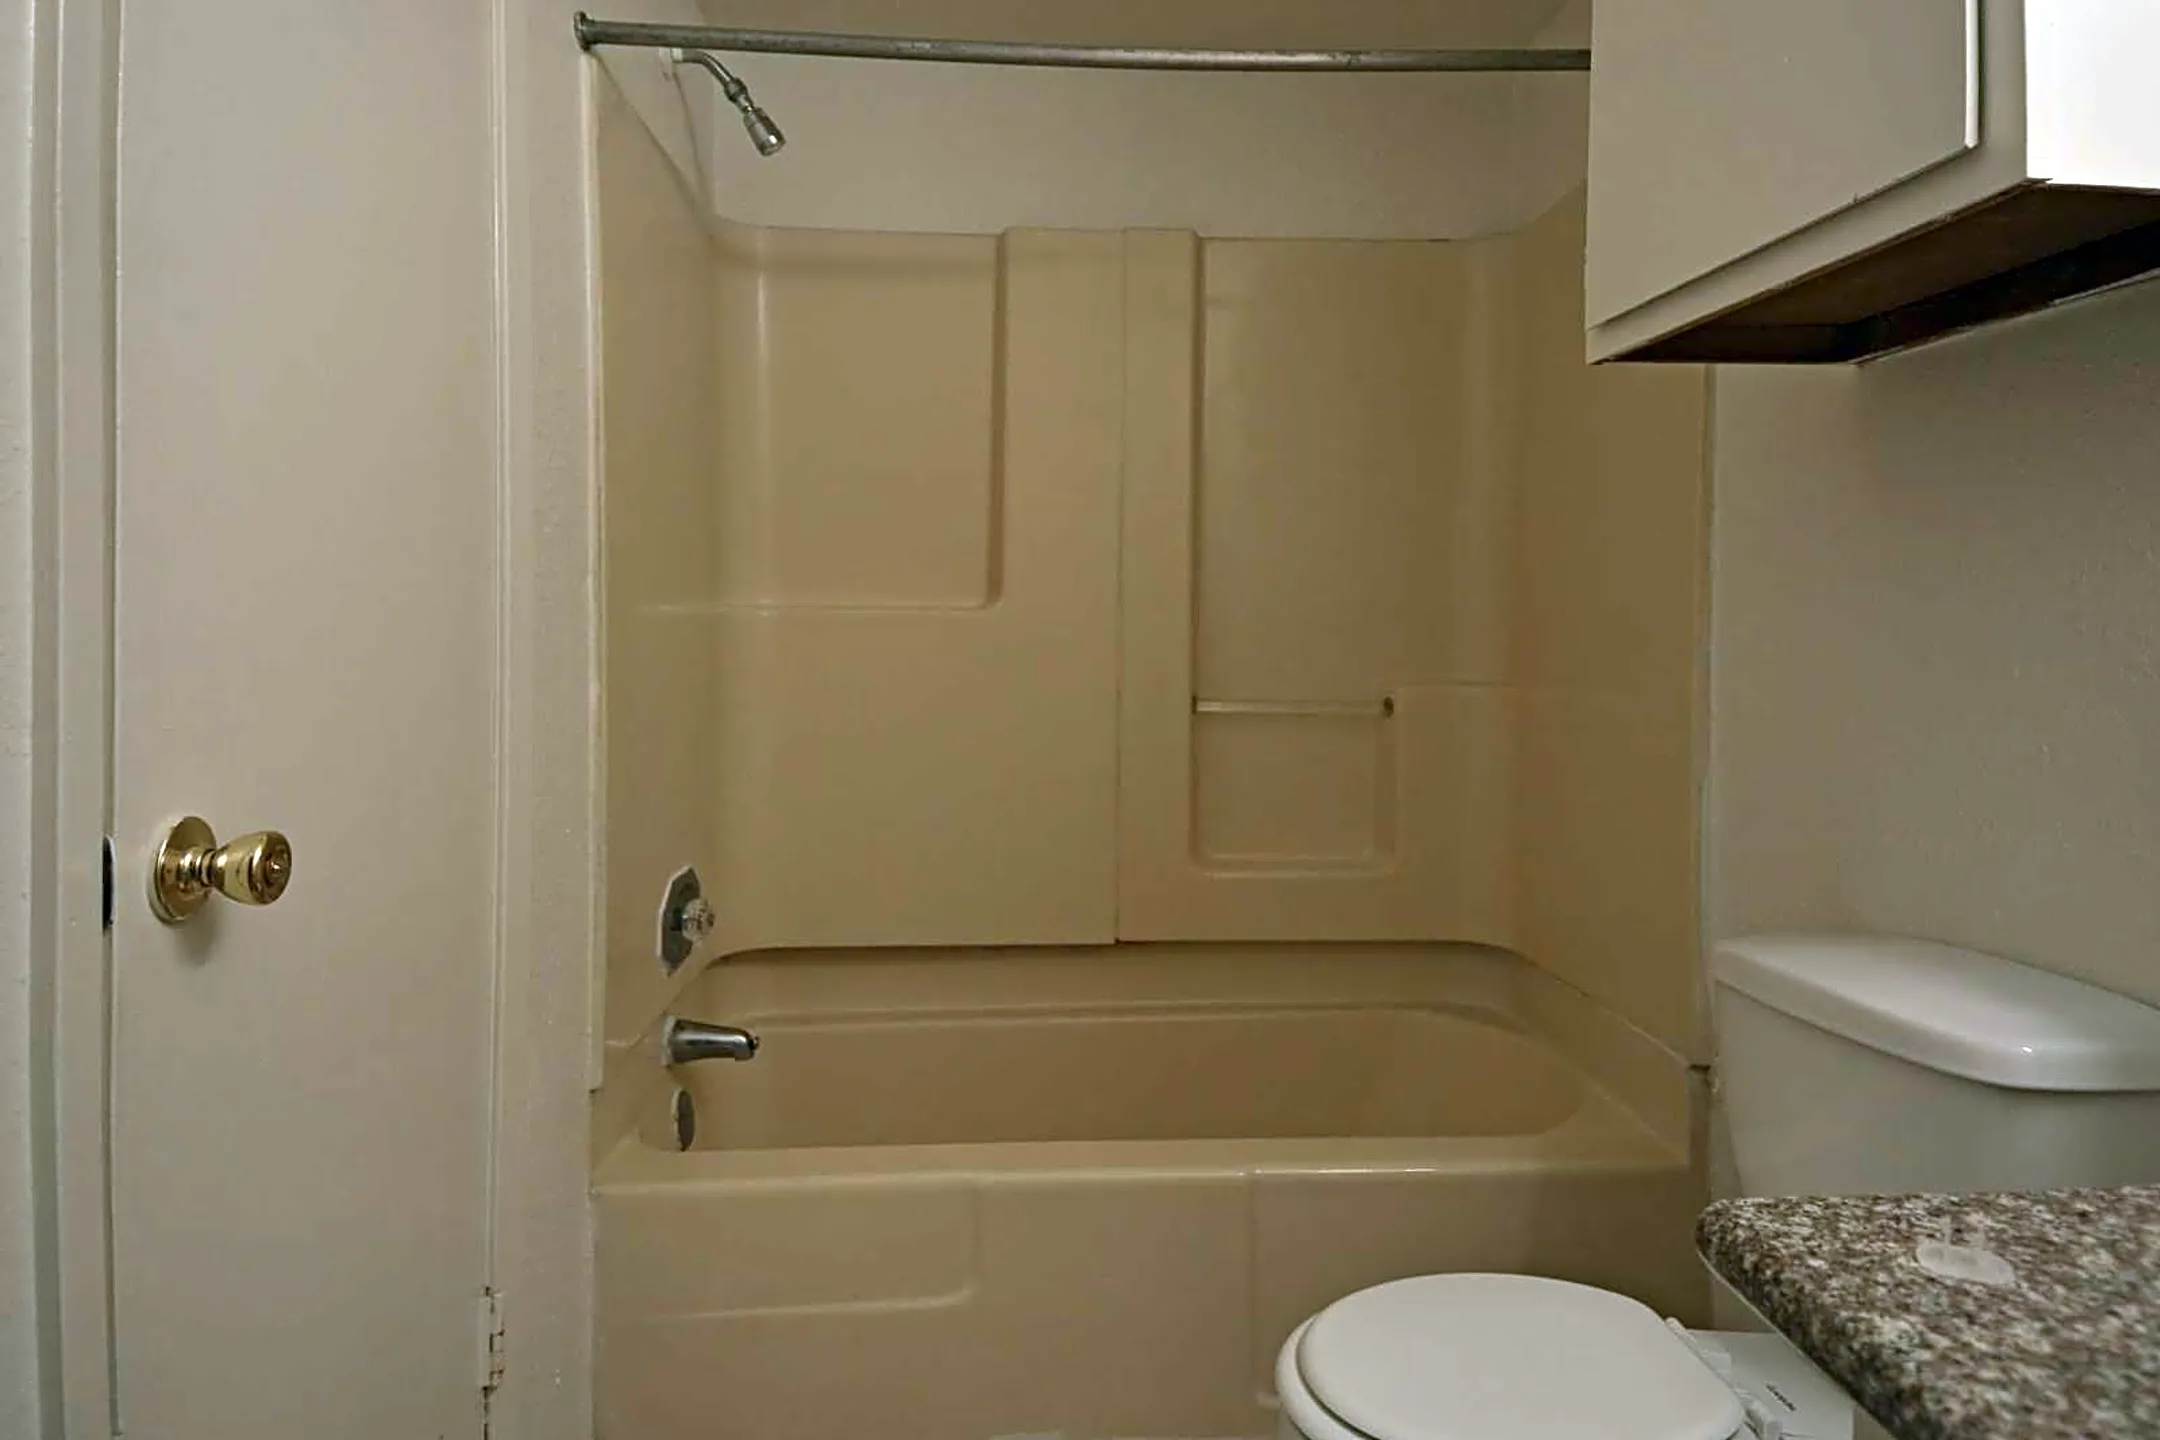 Bathroom - Parkway Circle Apartments - College Station, TX